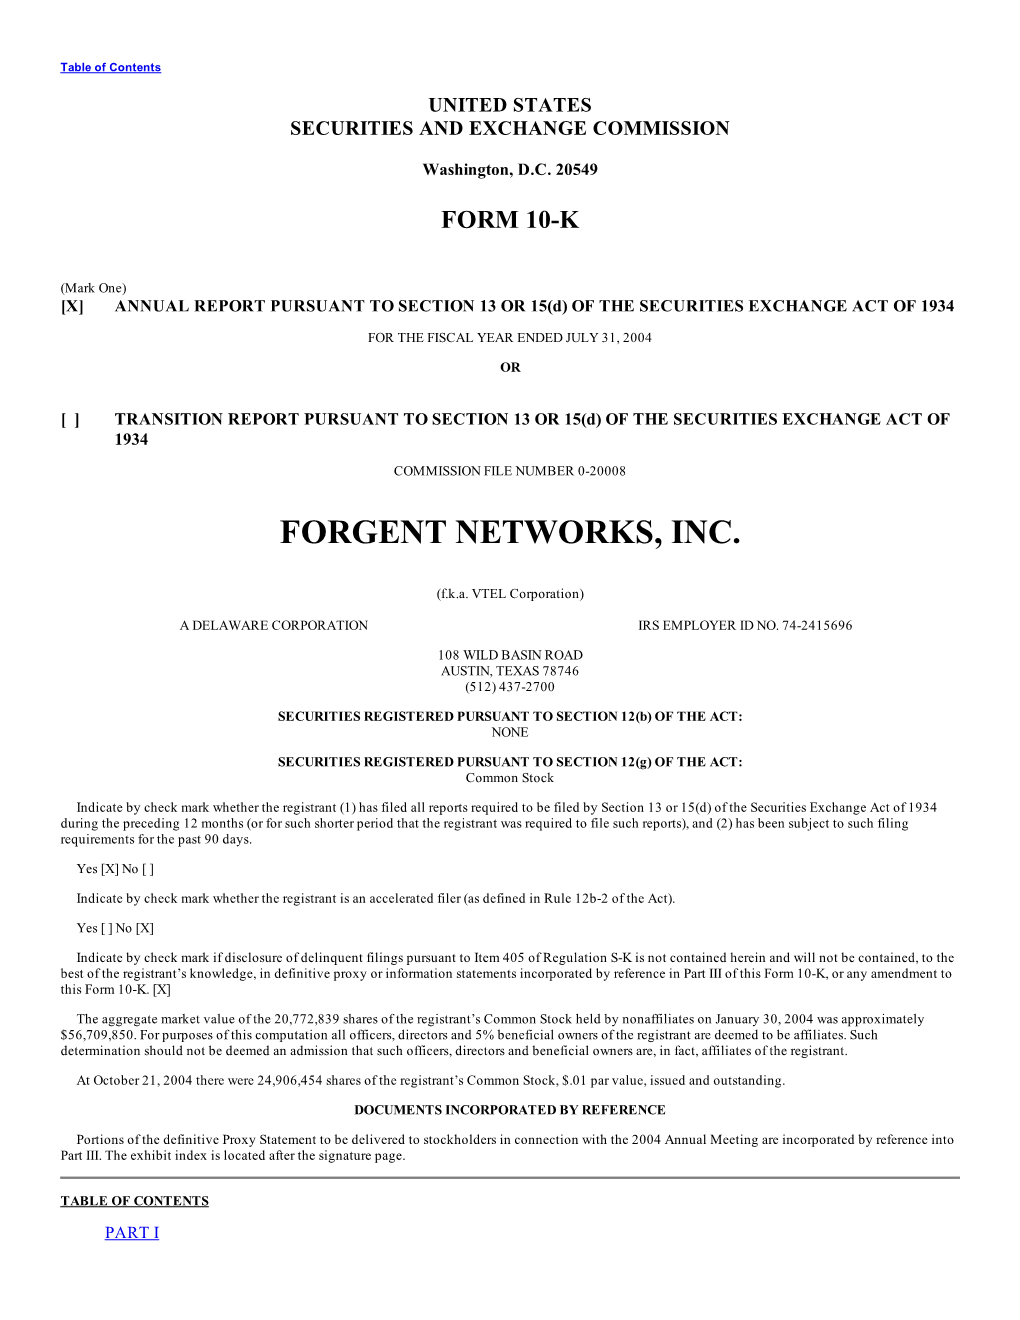 Forgent Networks, Inc